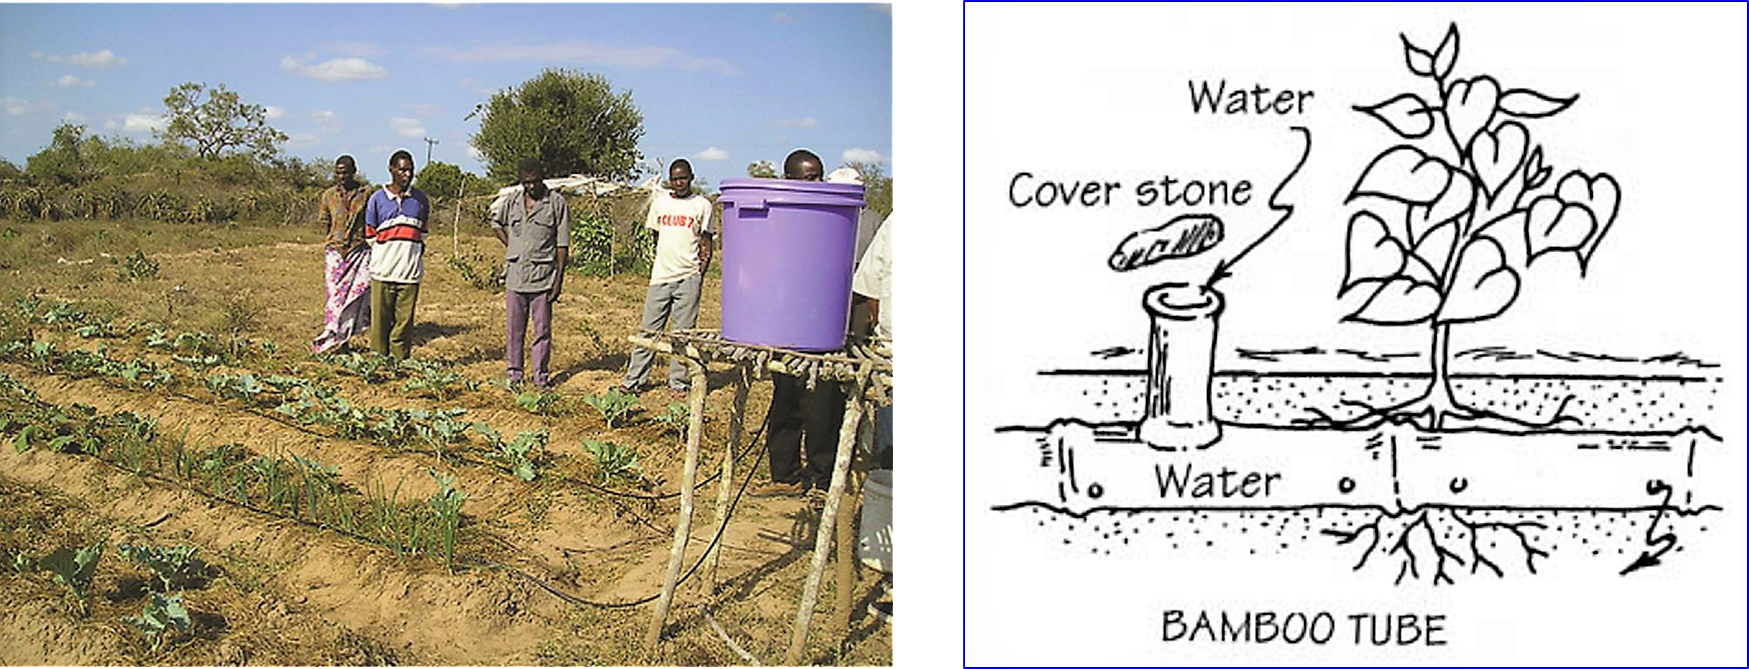 A self-made irrigation system in Africa with a bucket as a water reservoir and simple plastic hoses for the distribution. If bamboo is available, it can be used as distribution pipes. Source: STANDISH (2009) and INFONET-BIOVISION (2010)